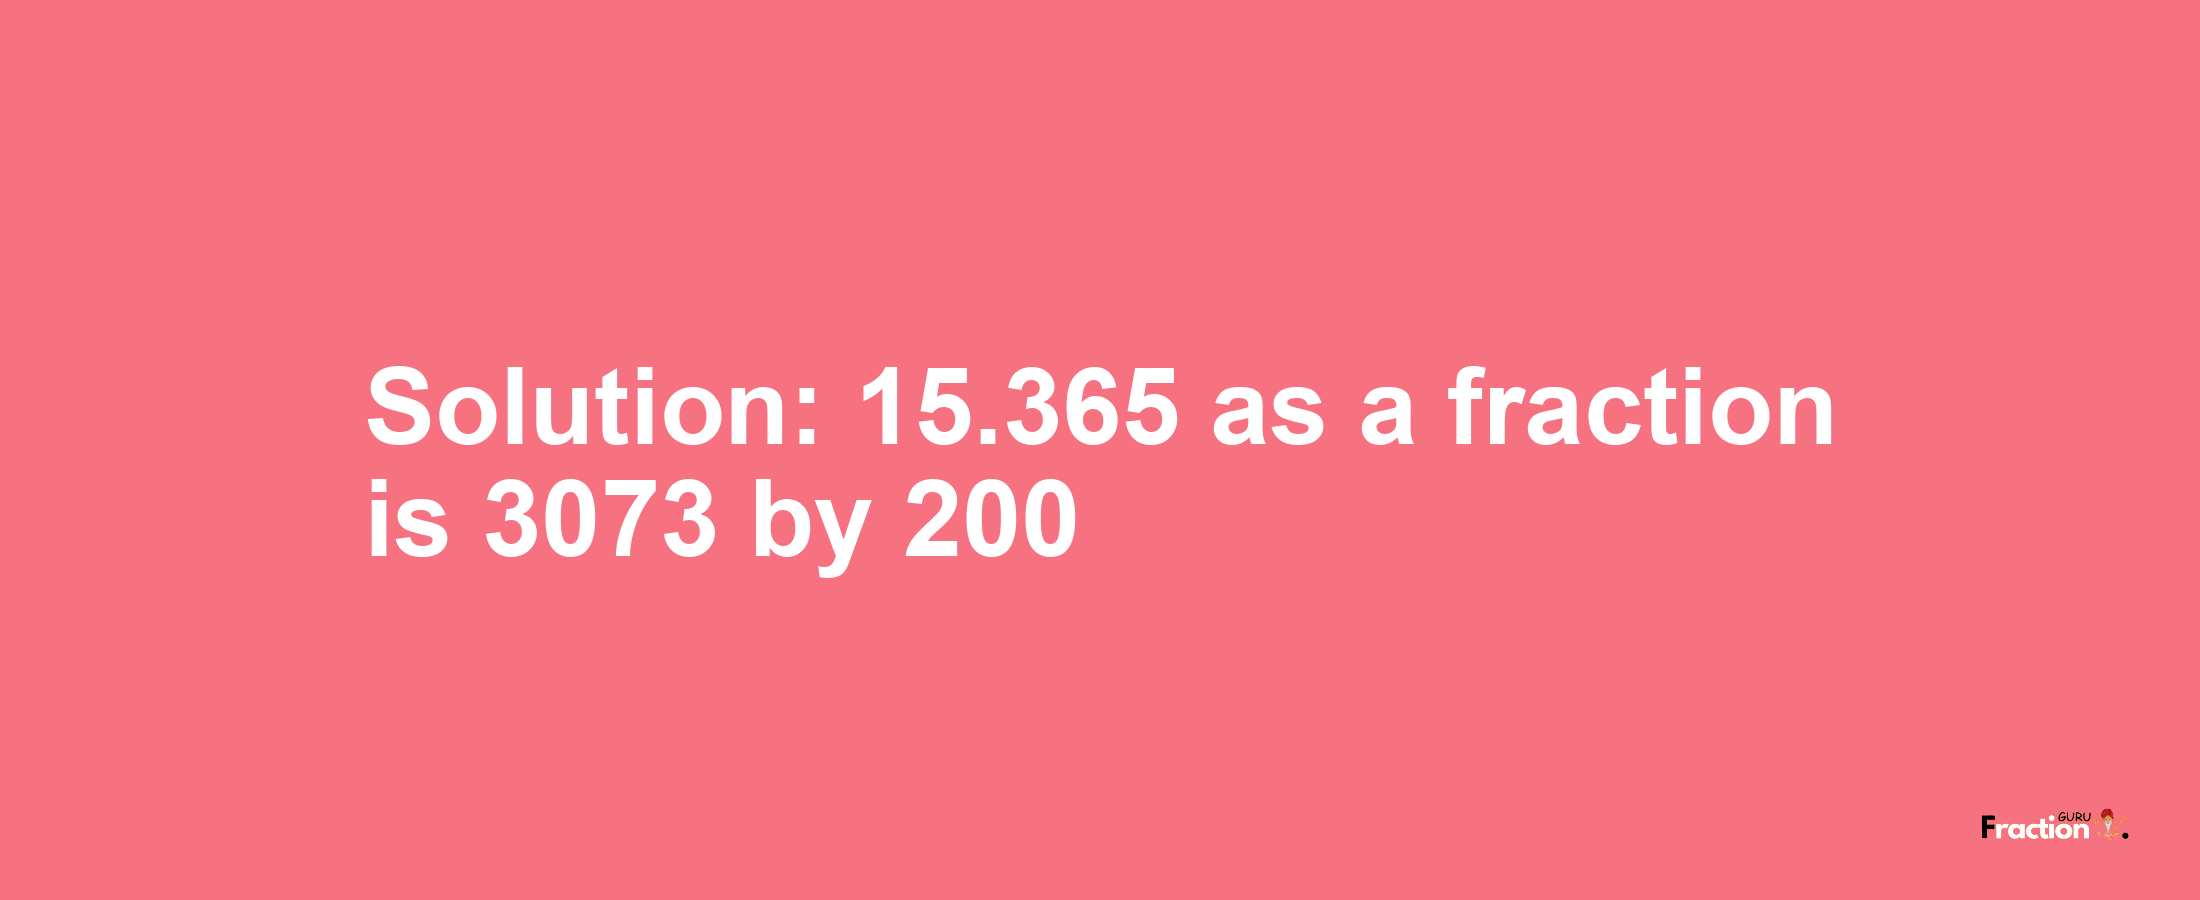 Solution:15.365 as a fraction is 3073/200